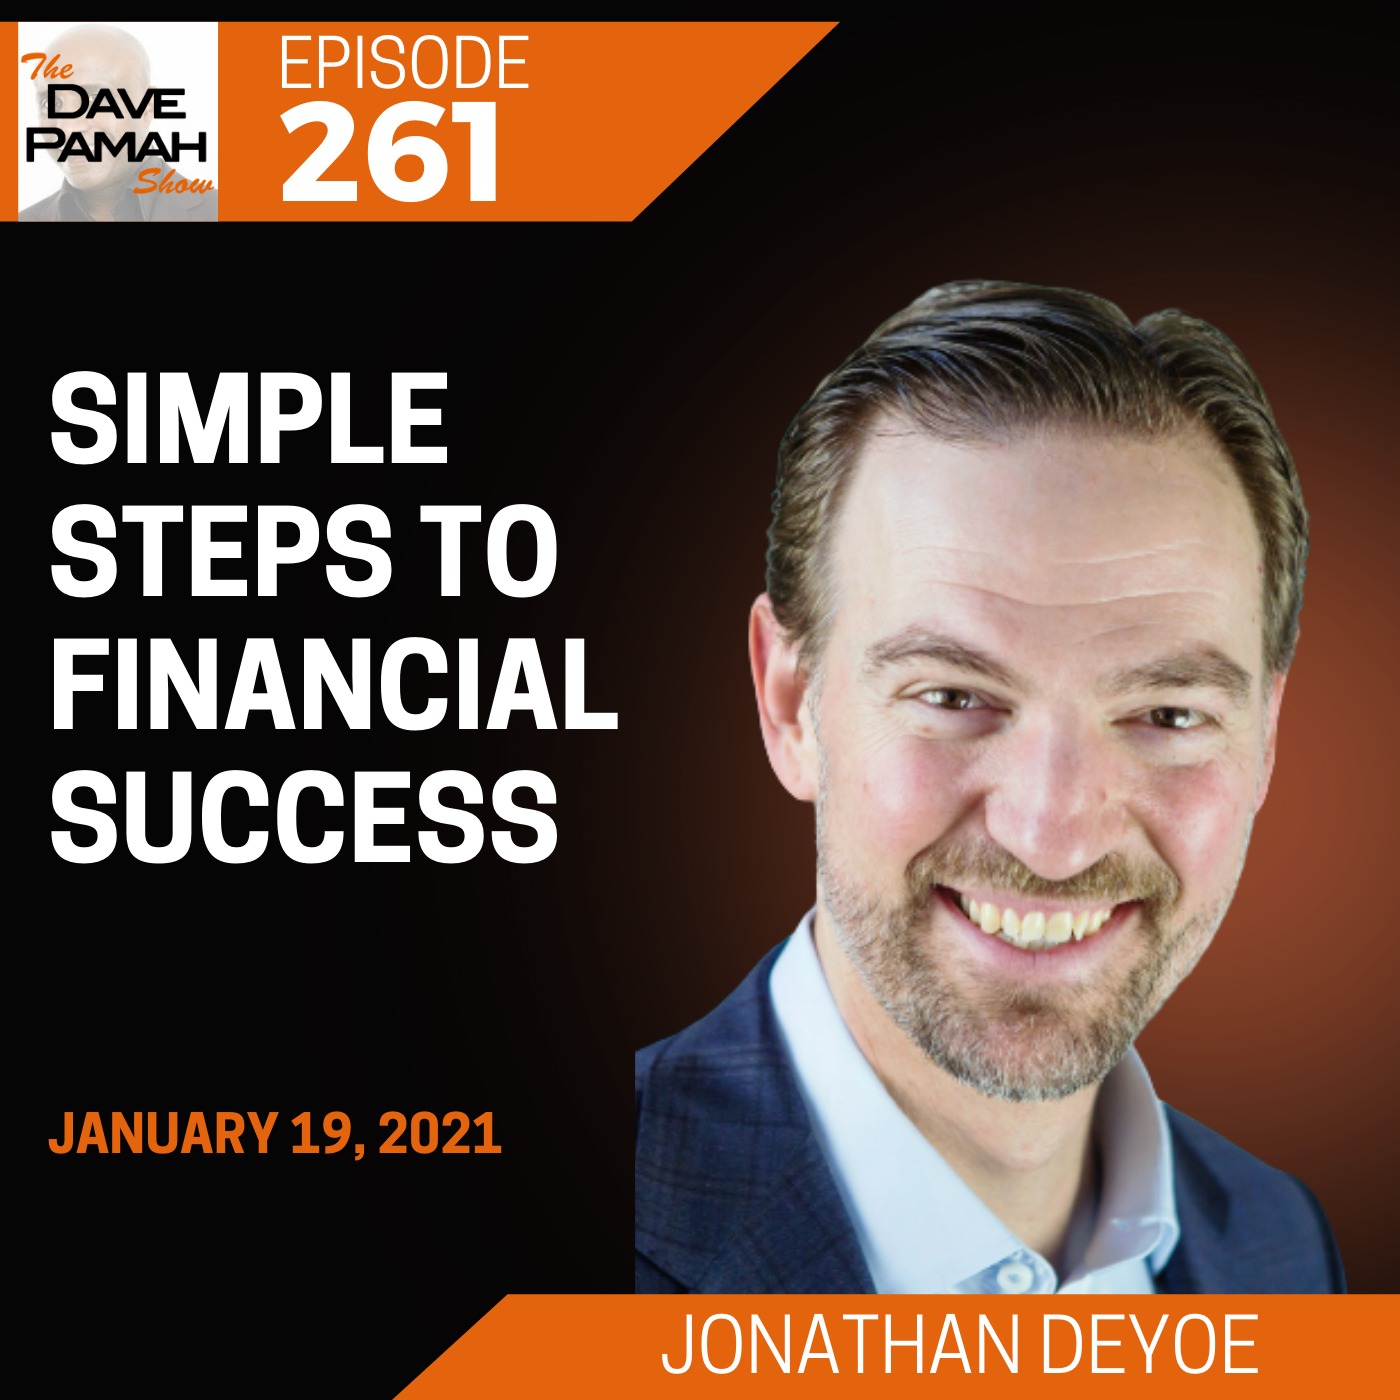 Simple steps to financial success with Jonathan DeYoe Image